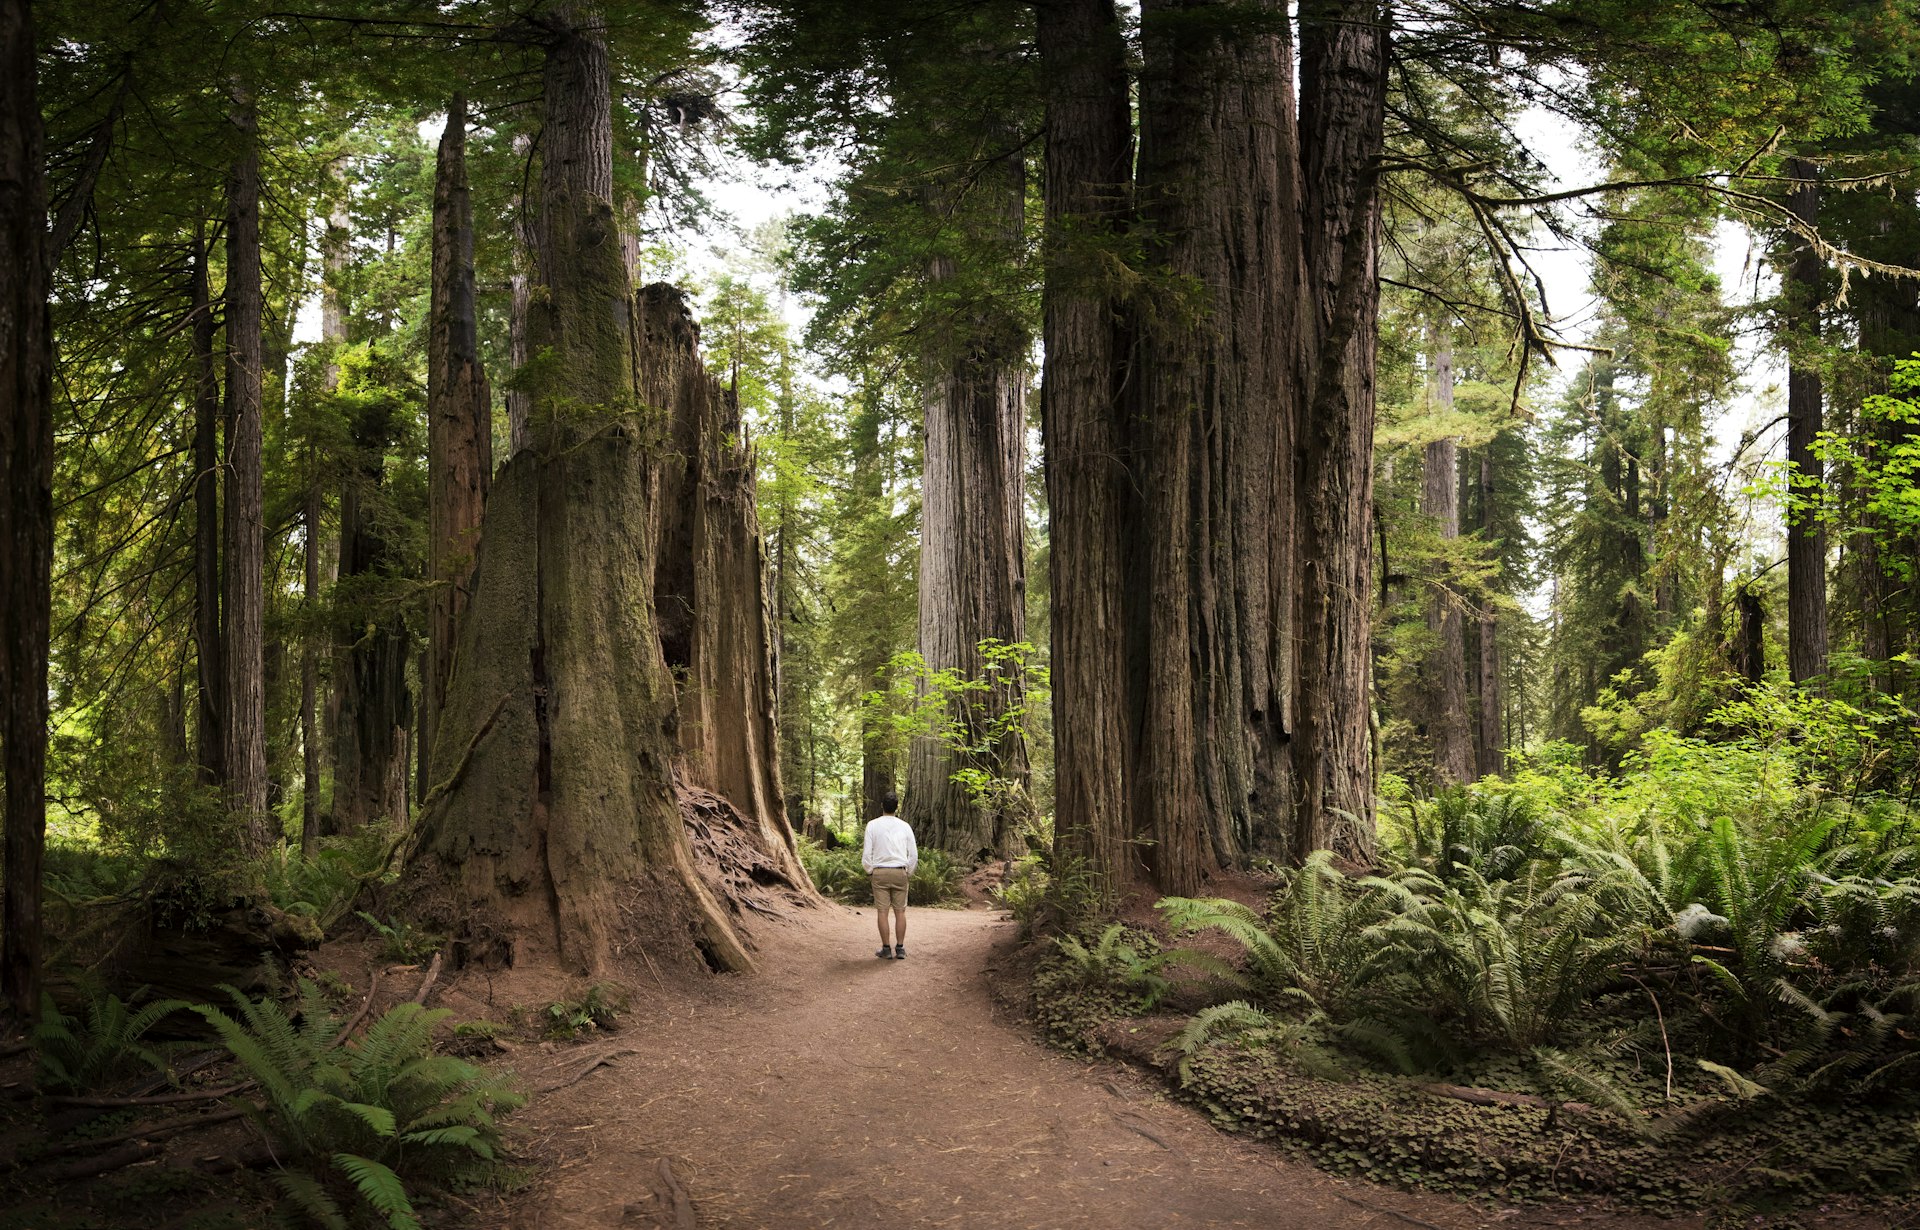 Rear View Of Man Walking At Forest in Redwoods National Park, USA.